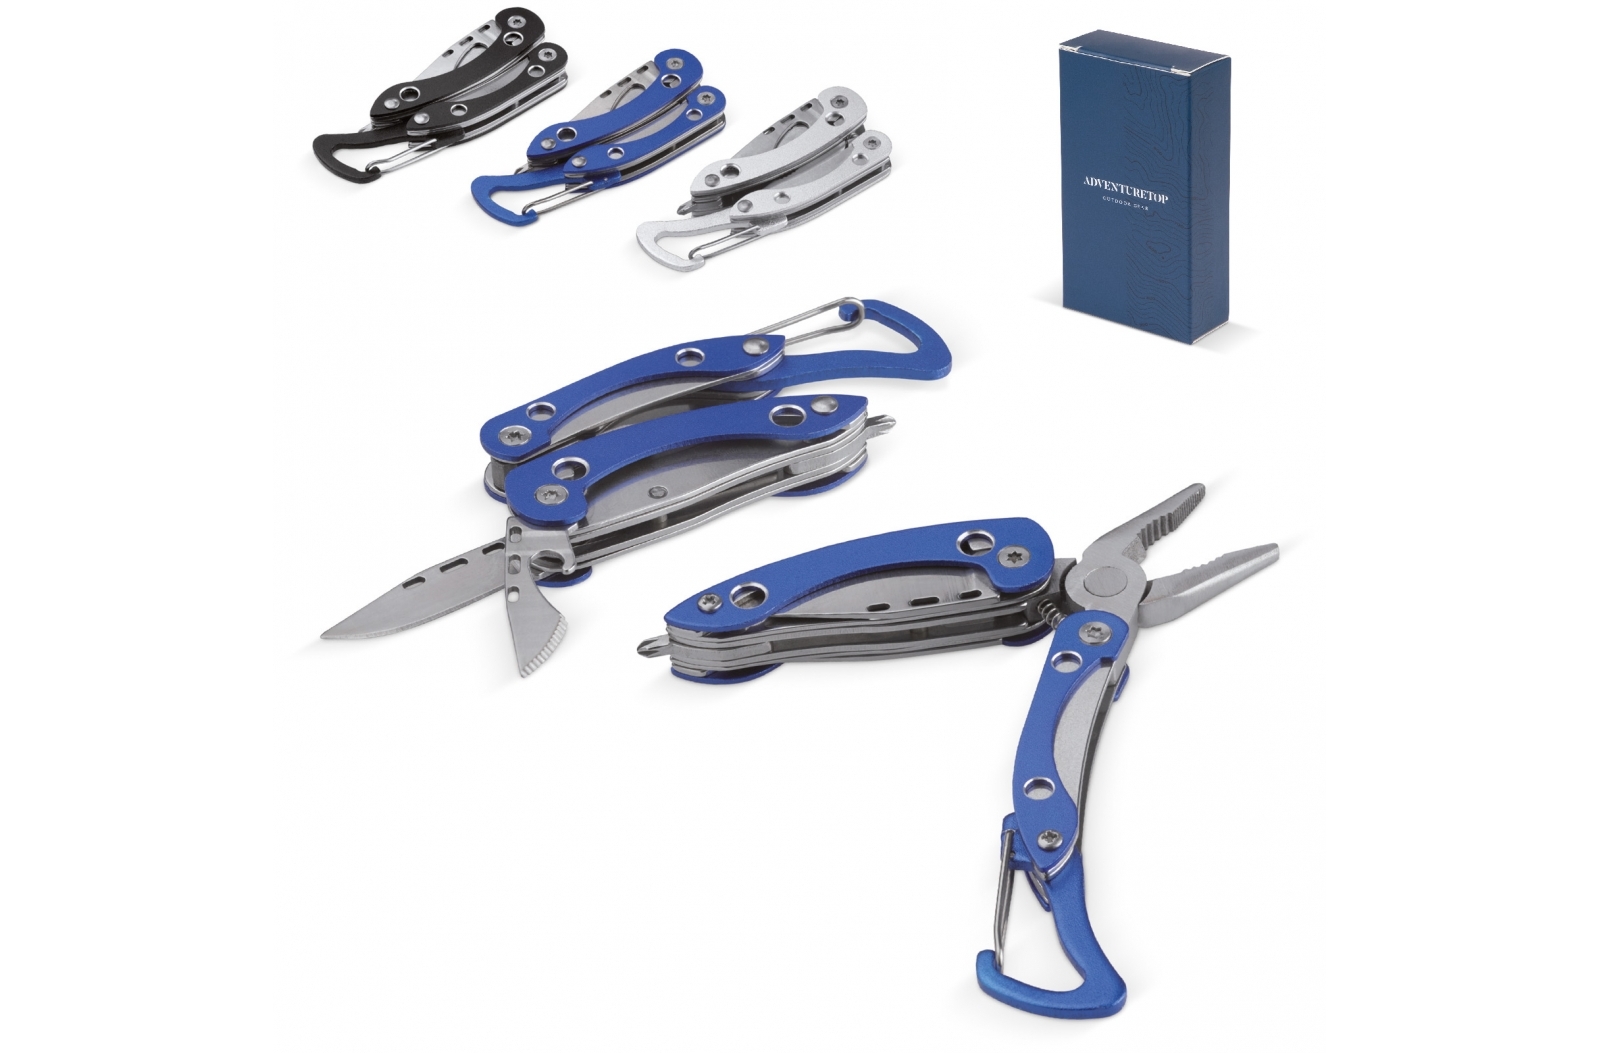 An outdoor multi-tool that comes with a carabiner and is packaged in a gift box. - Barford